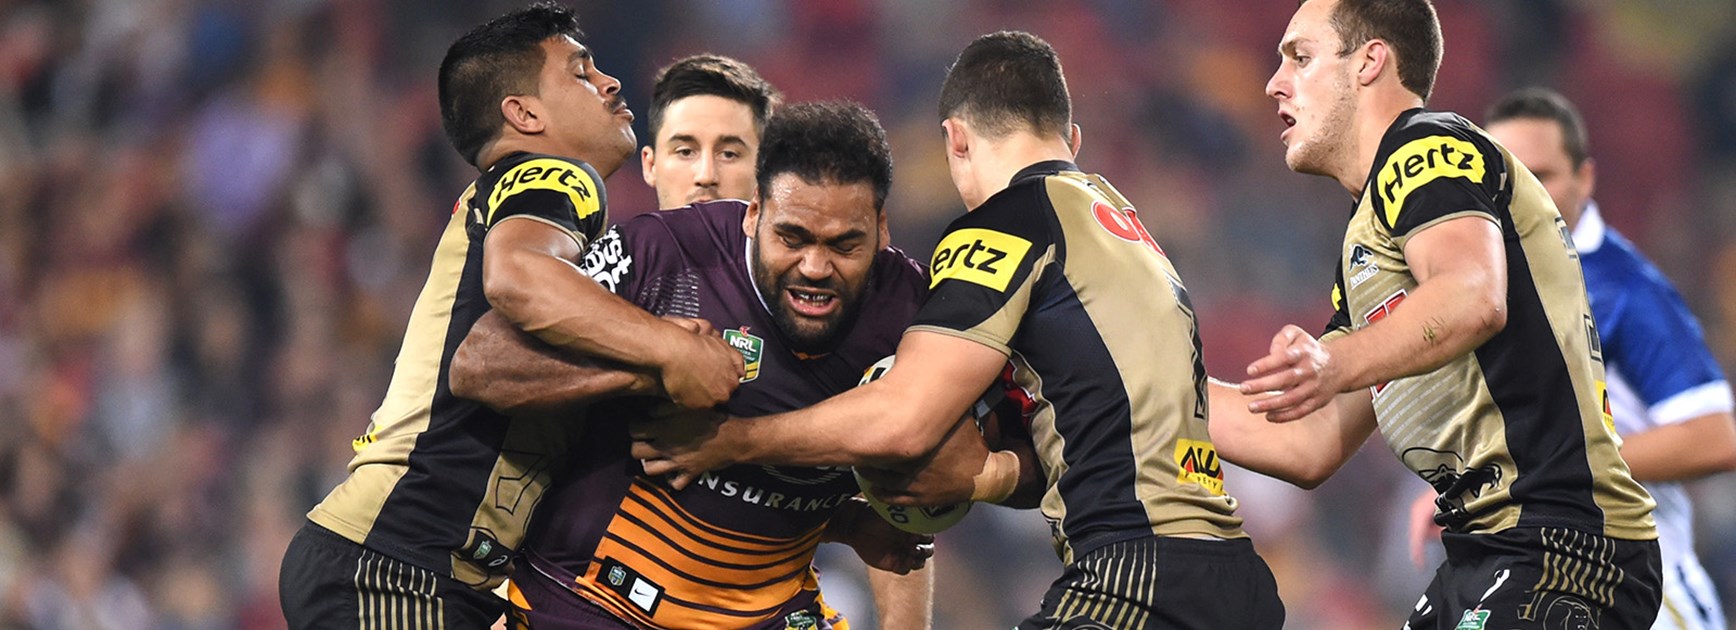 Sam Thaiday makes a run against the Panthers at Suncorp Stadium in Round 20.